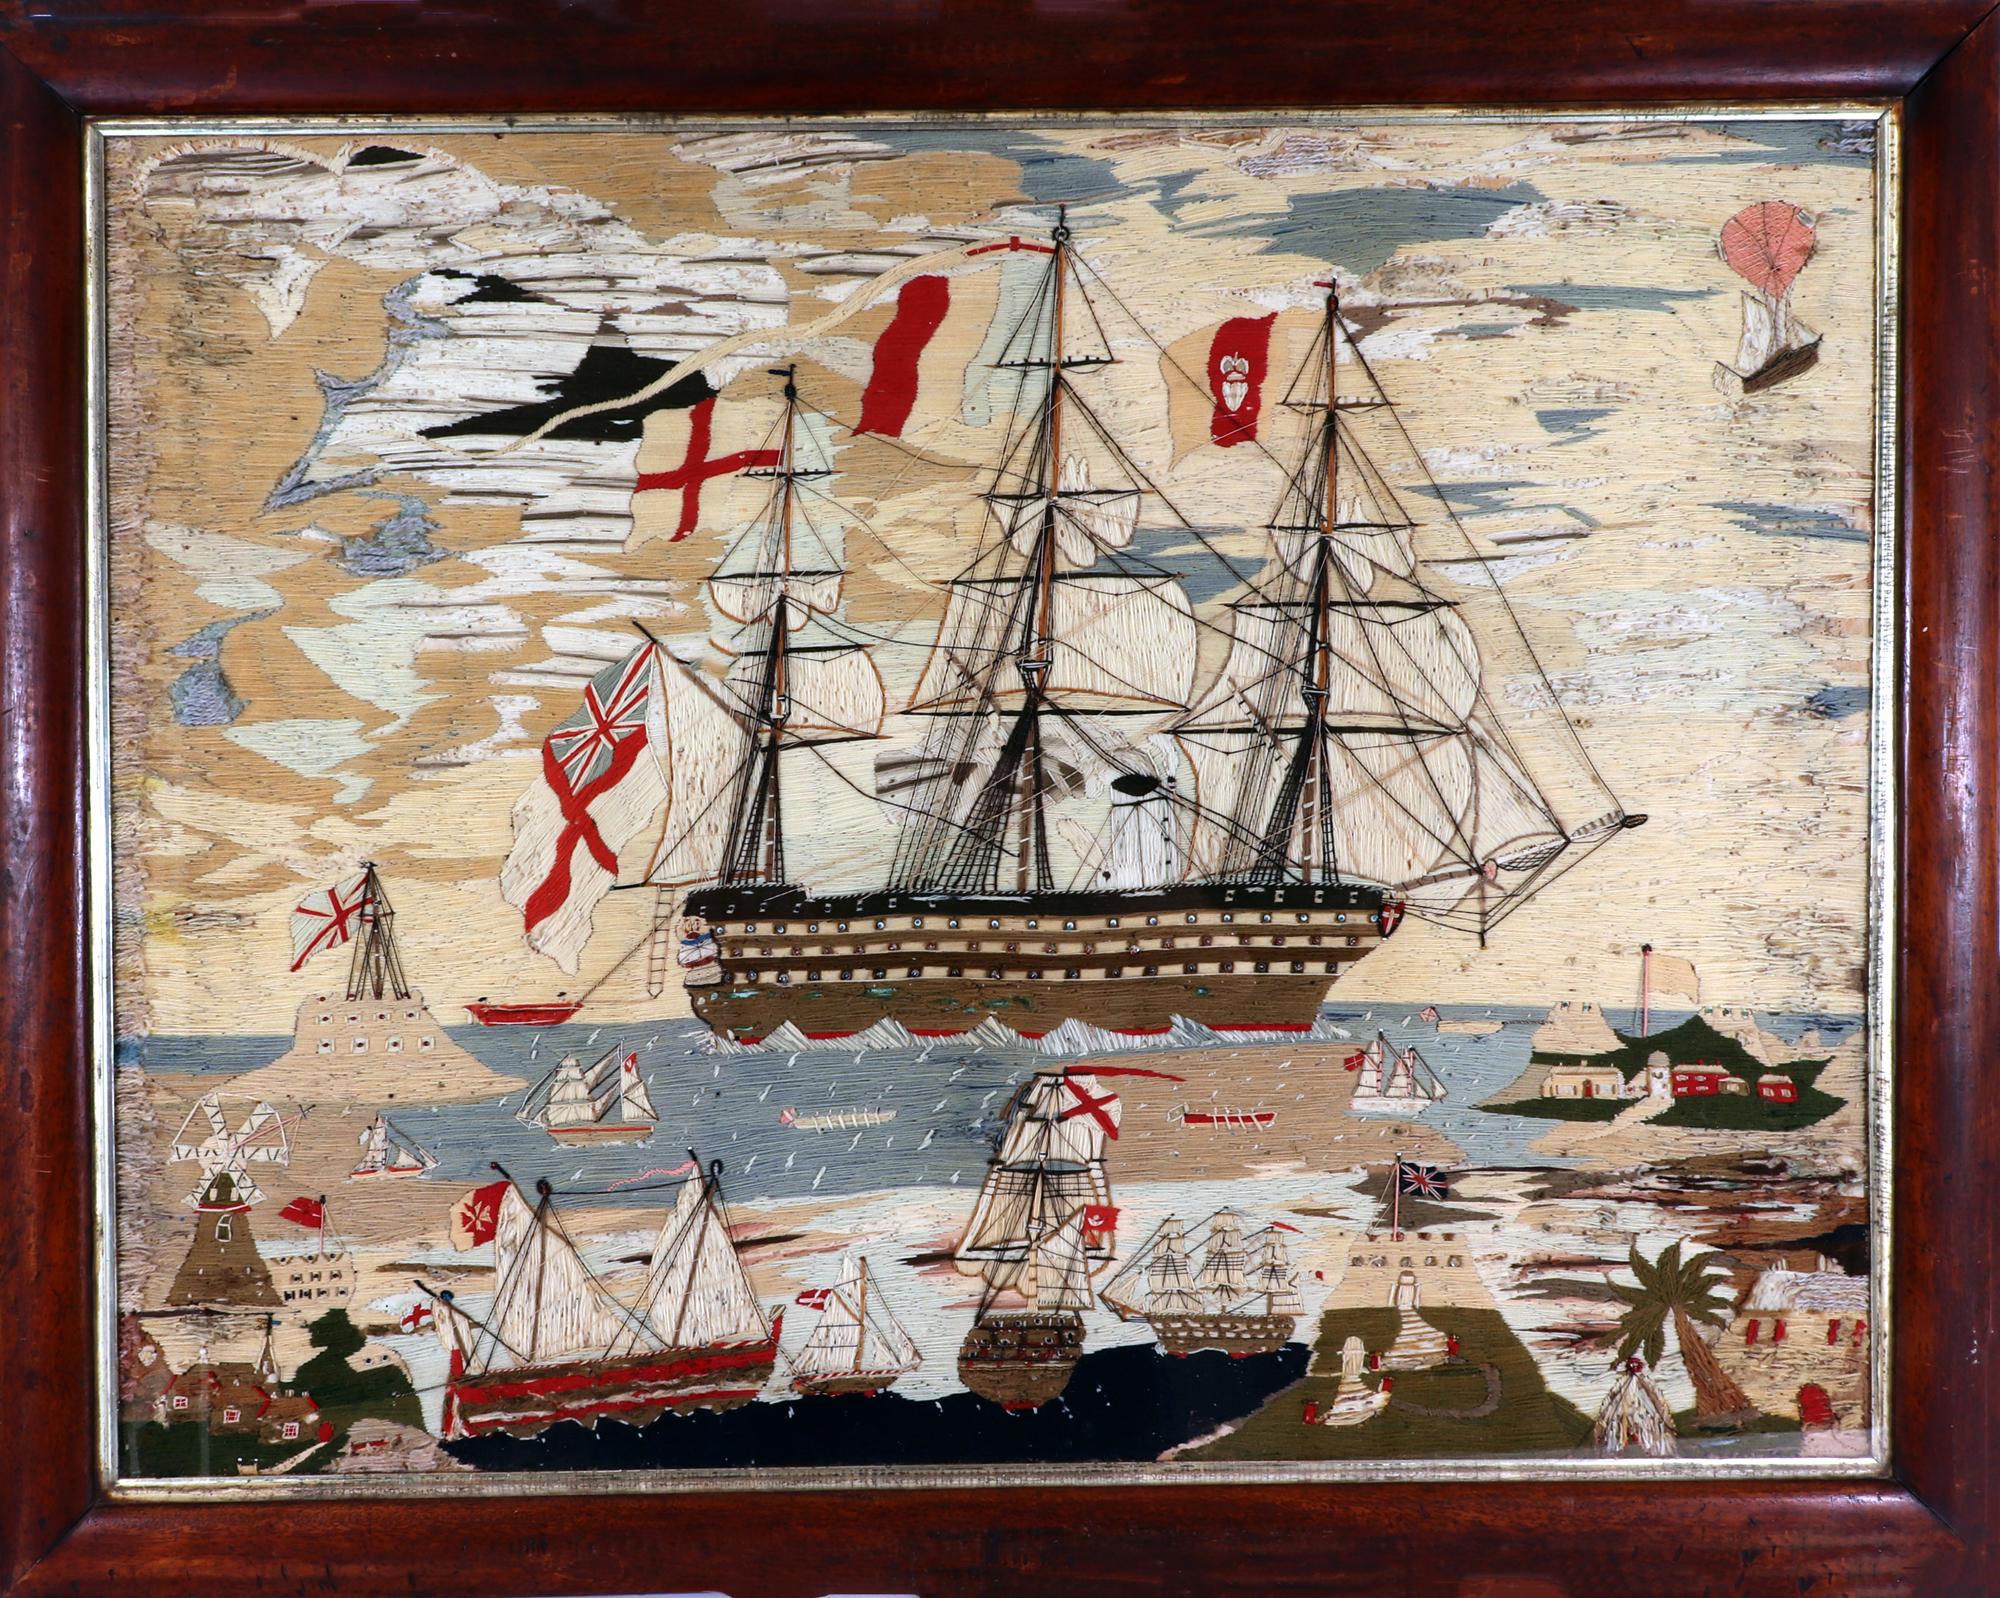 Sailor's Woolwork of Large Proportions with Multiple Ships, 
Circa 1865 

The extremely large detailed woolwork depicts, in the center, a fully dressed First Rate Royal Navy Battleship sailing under sail and steam in a harbor surrounded by a sea